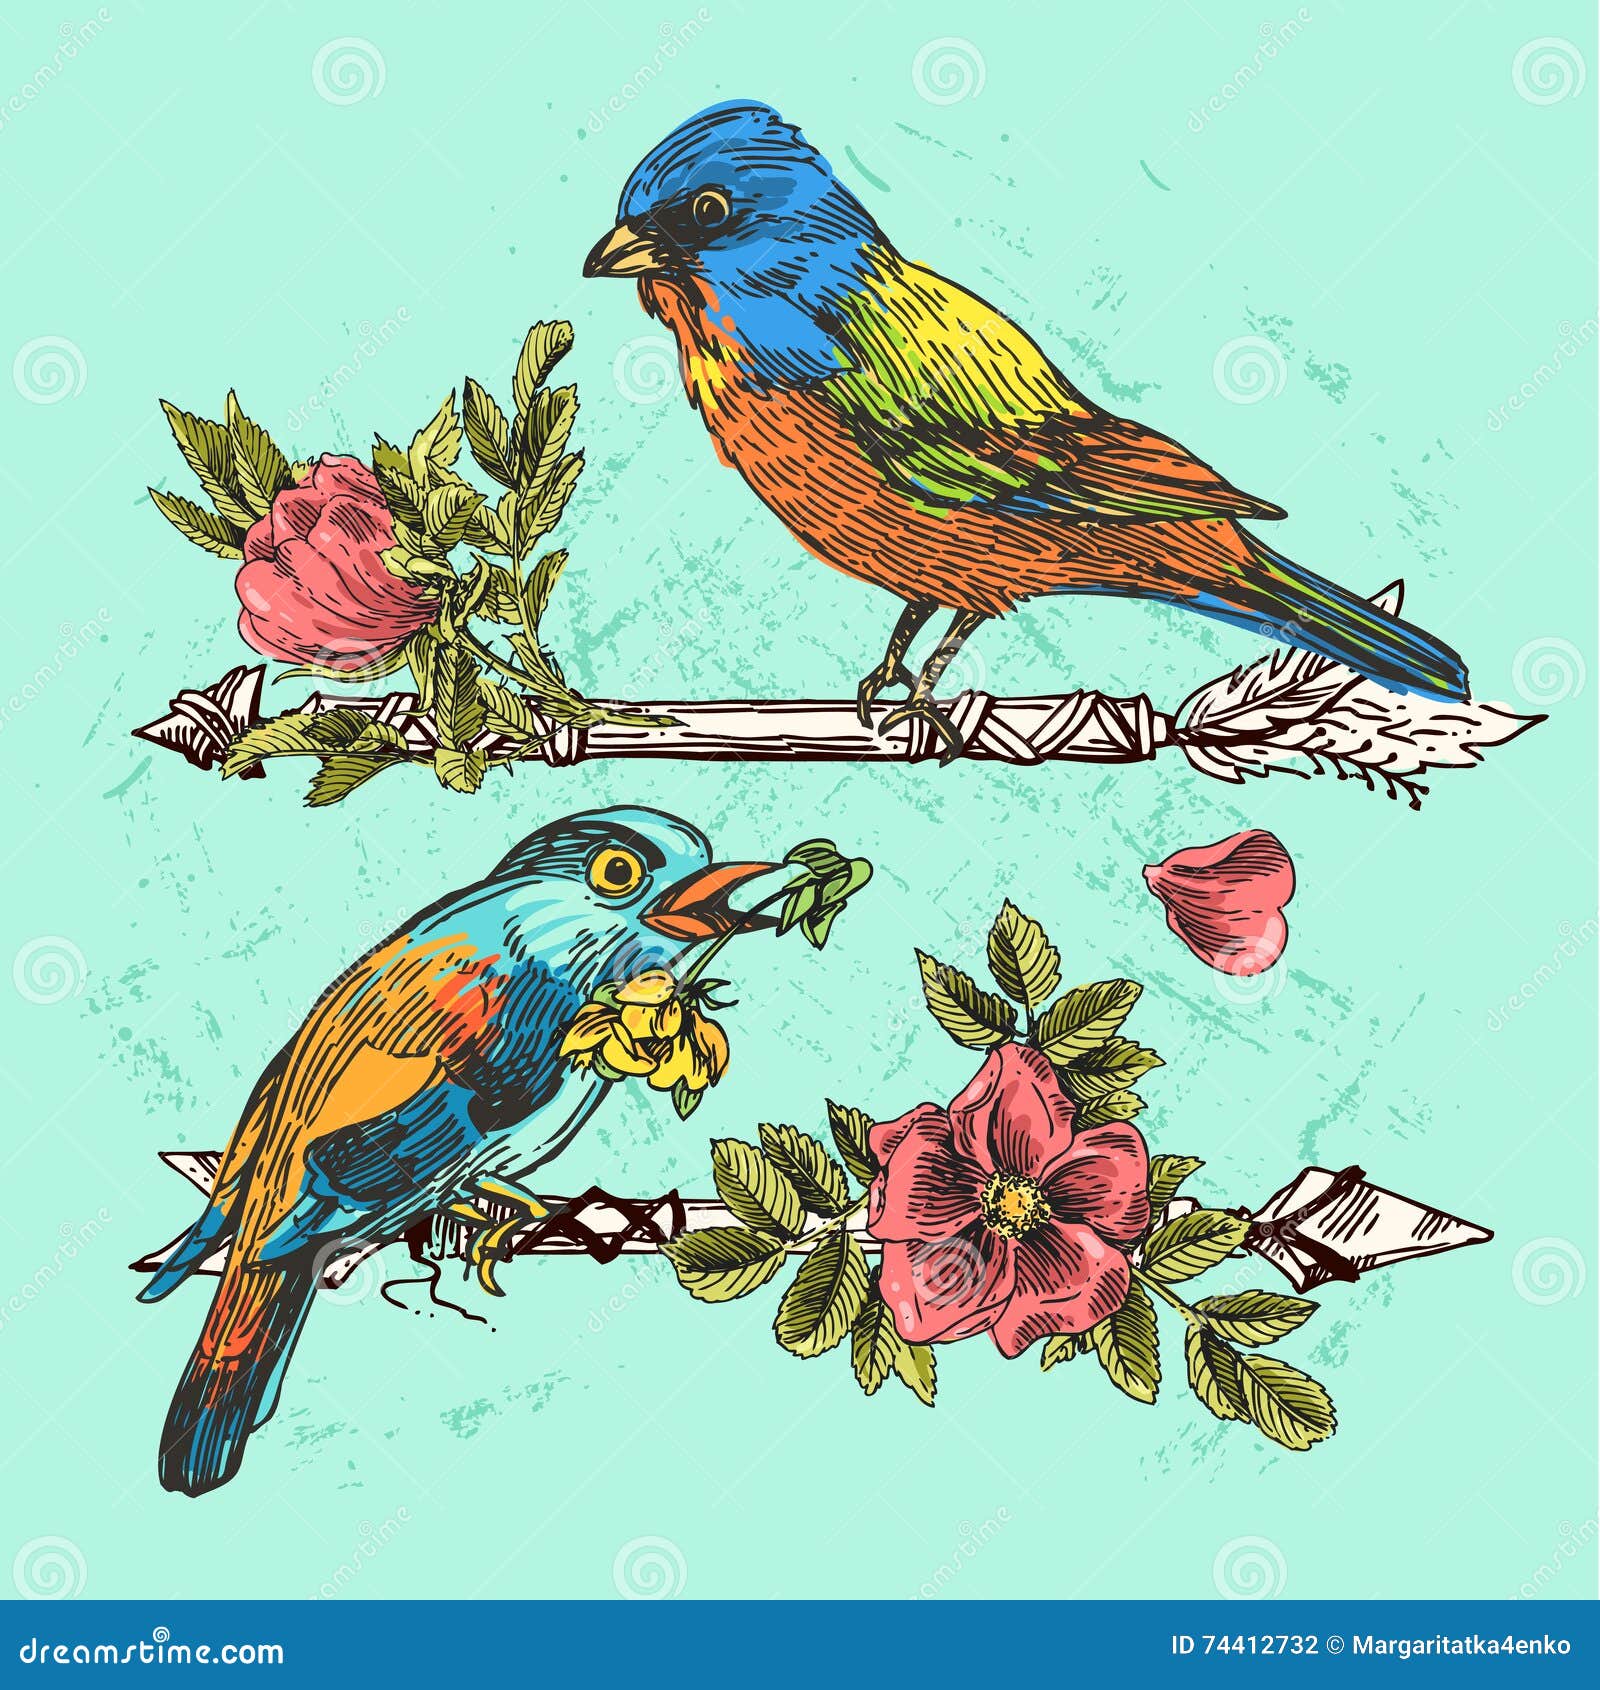 Skylark Cartoons Illustrations And Vector Stock Images 58 Pictures To Download From